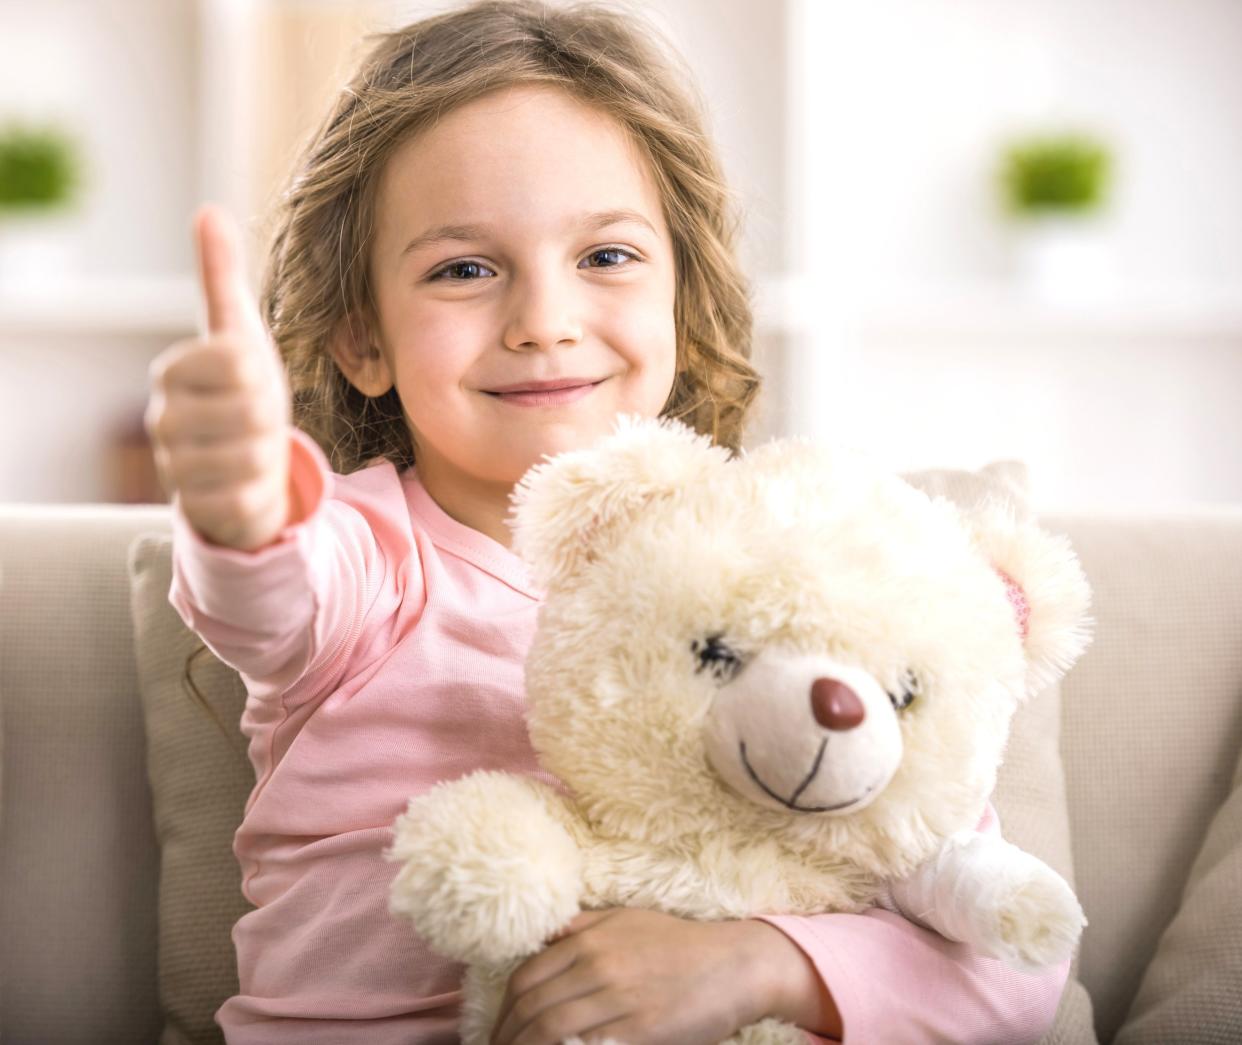 little girl sitting on a sofa with teddy bear and showing thumbs up